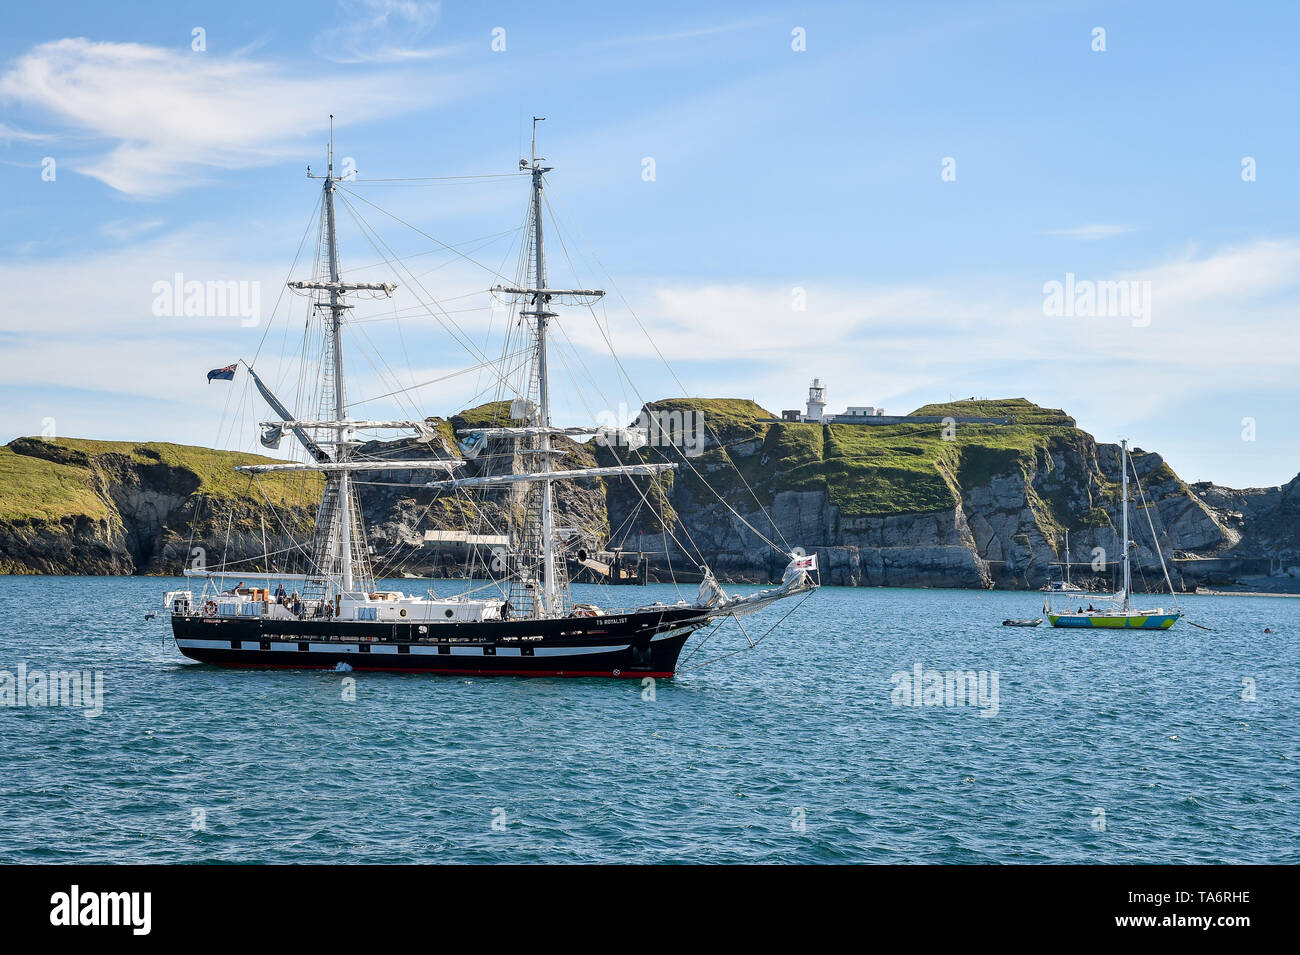 The Sea Cadets flagship TS ROYALIST sits anchored off the shore of Lundy Island in the Bristol Channel, where the training brig is on a six day voyage carrying over 20 cadets to sea around parts of the UK coast. Stock Photo